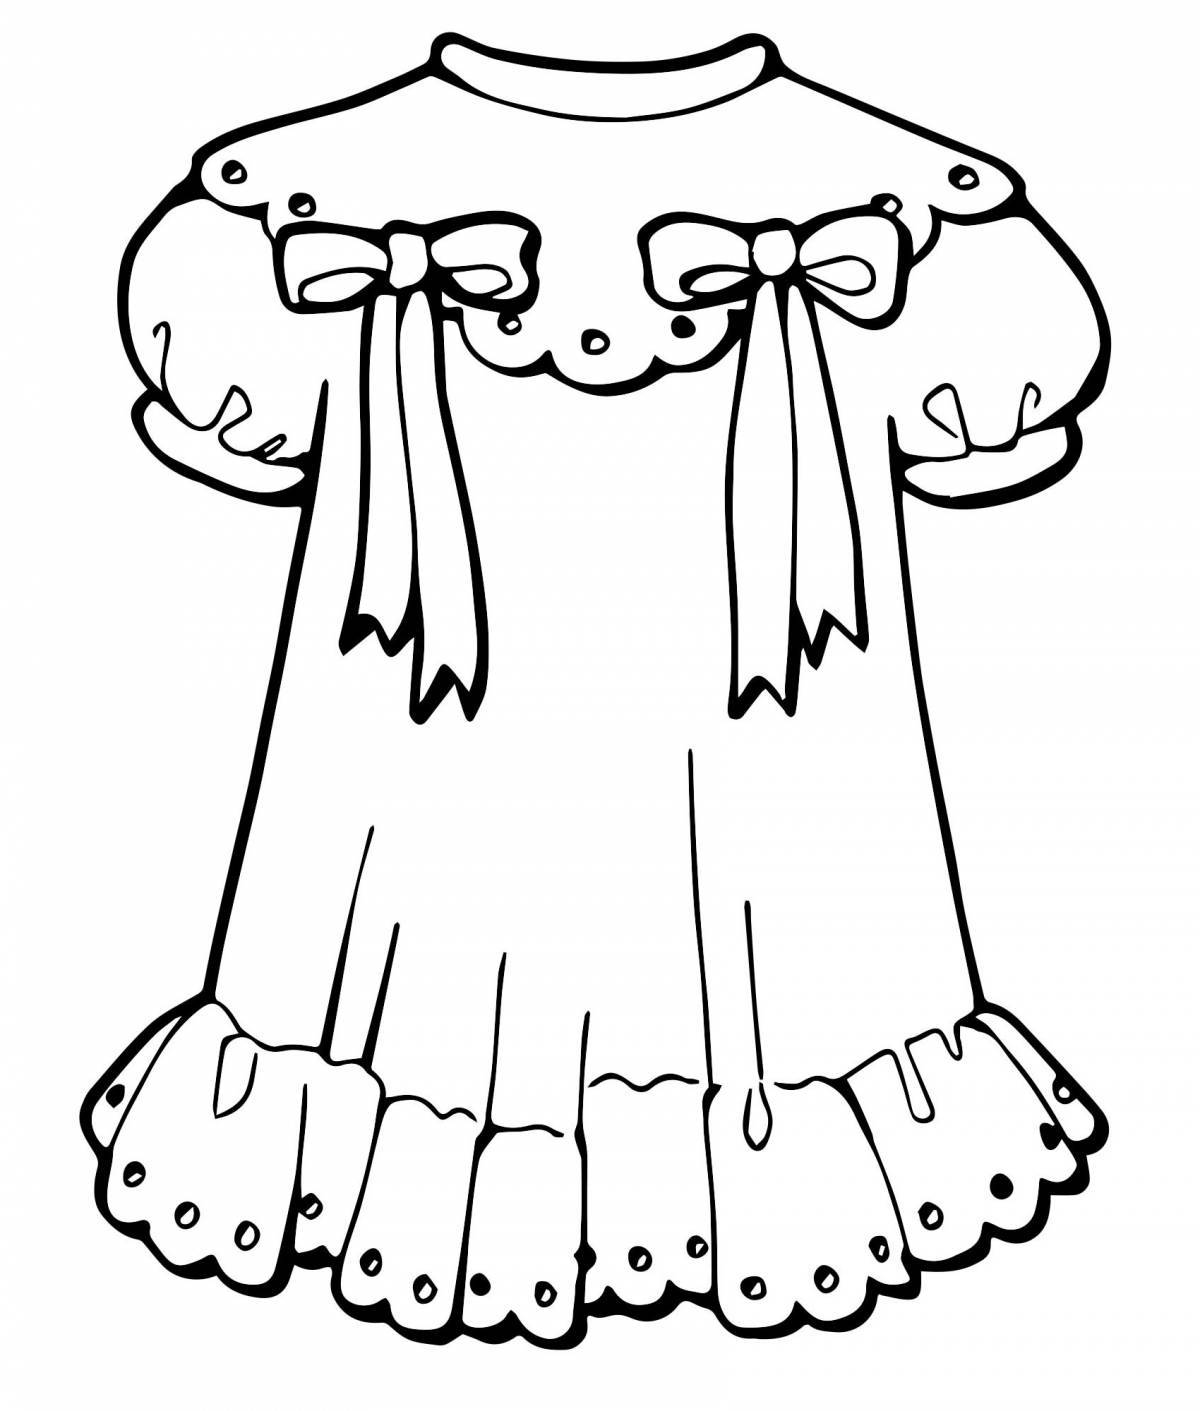 Coloring mystical dress for children